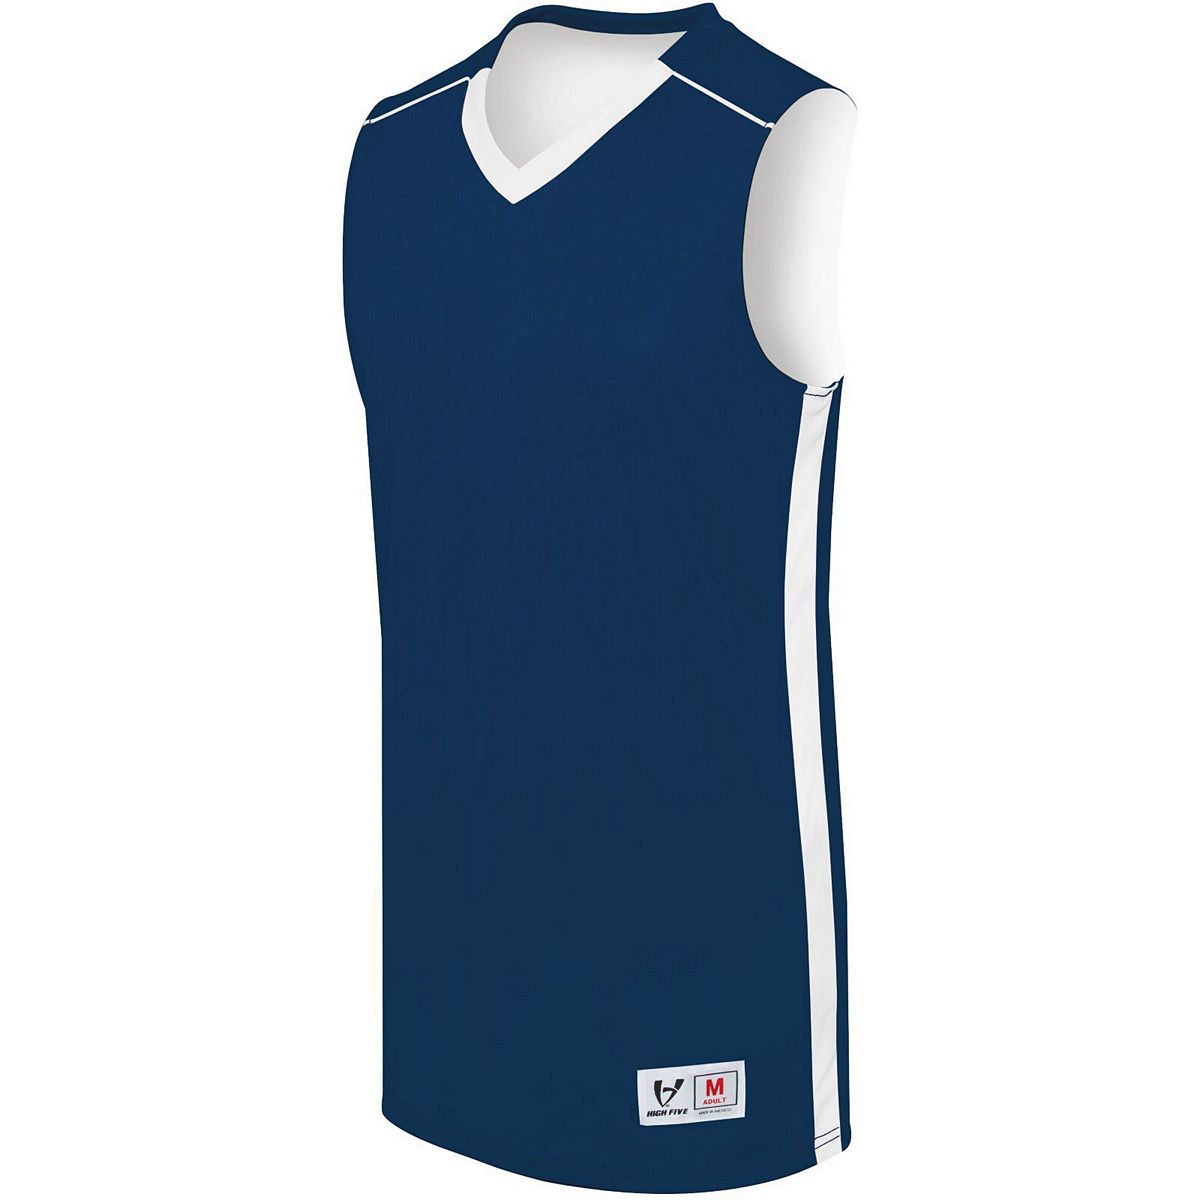 Augusta Sportswear Youth Competition Reversible Jersey in Navy/White  -Part of the Youth, Youth-Jersey, Augusta-Products, Basketball, Shirts, All-Sports, All-Sports-1 product lines at KanaleyCreations.com